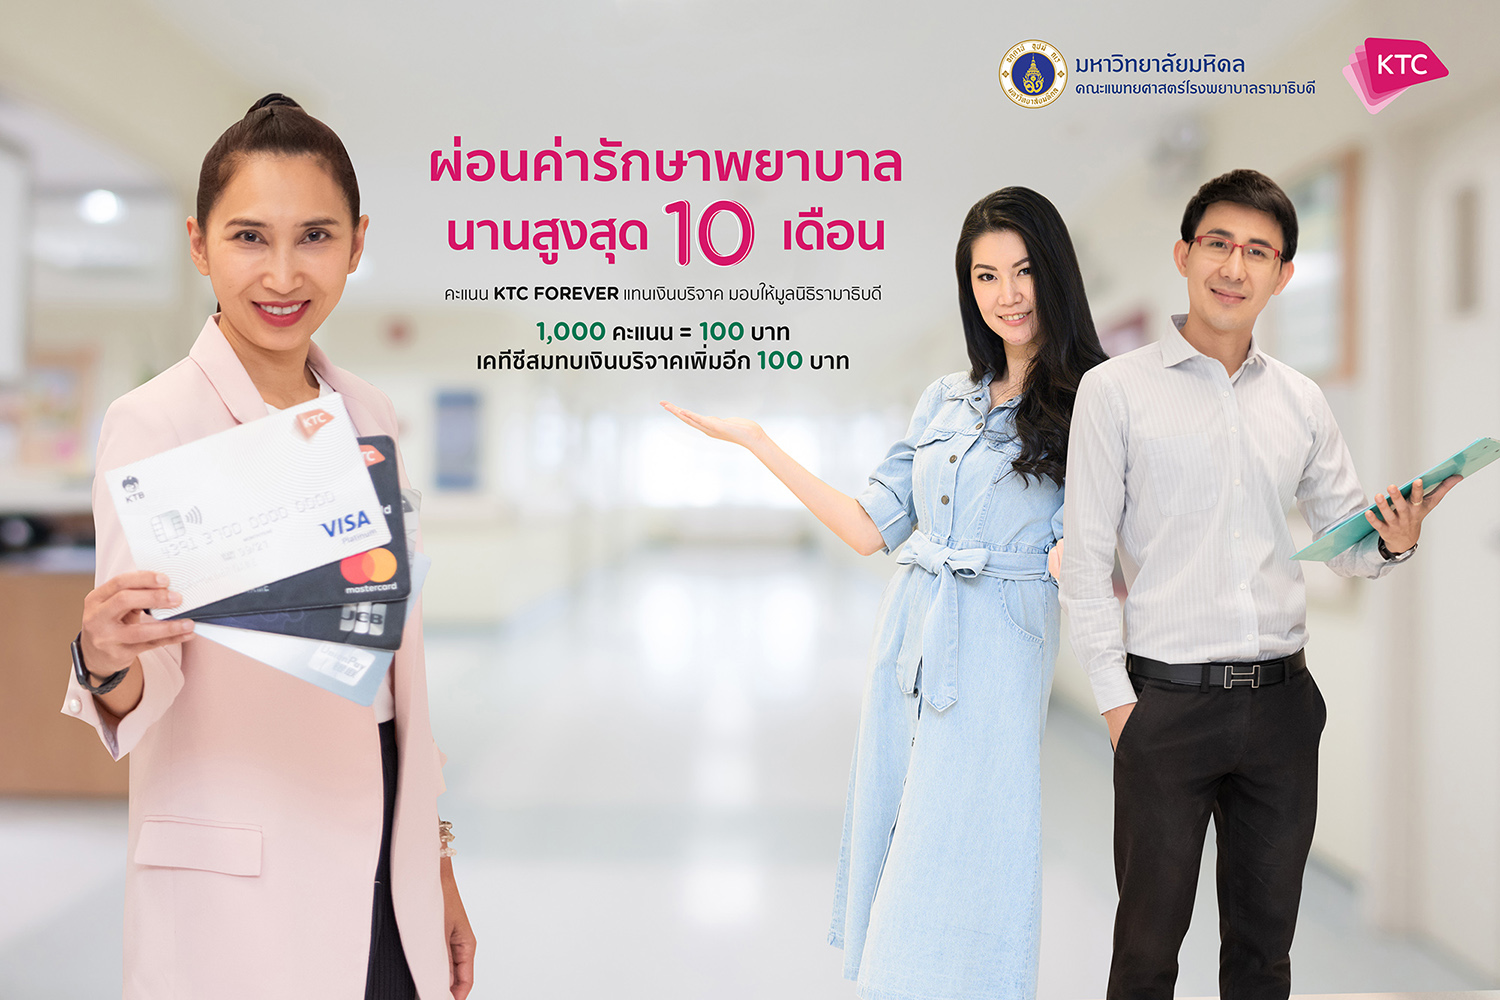 KTC jointly with Ramathibodi Hospital let KTC credit cardmembers feel at ease with installment payment options for medical expenses